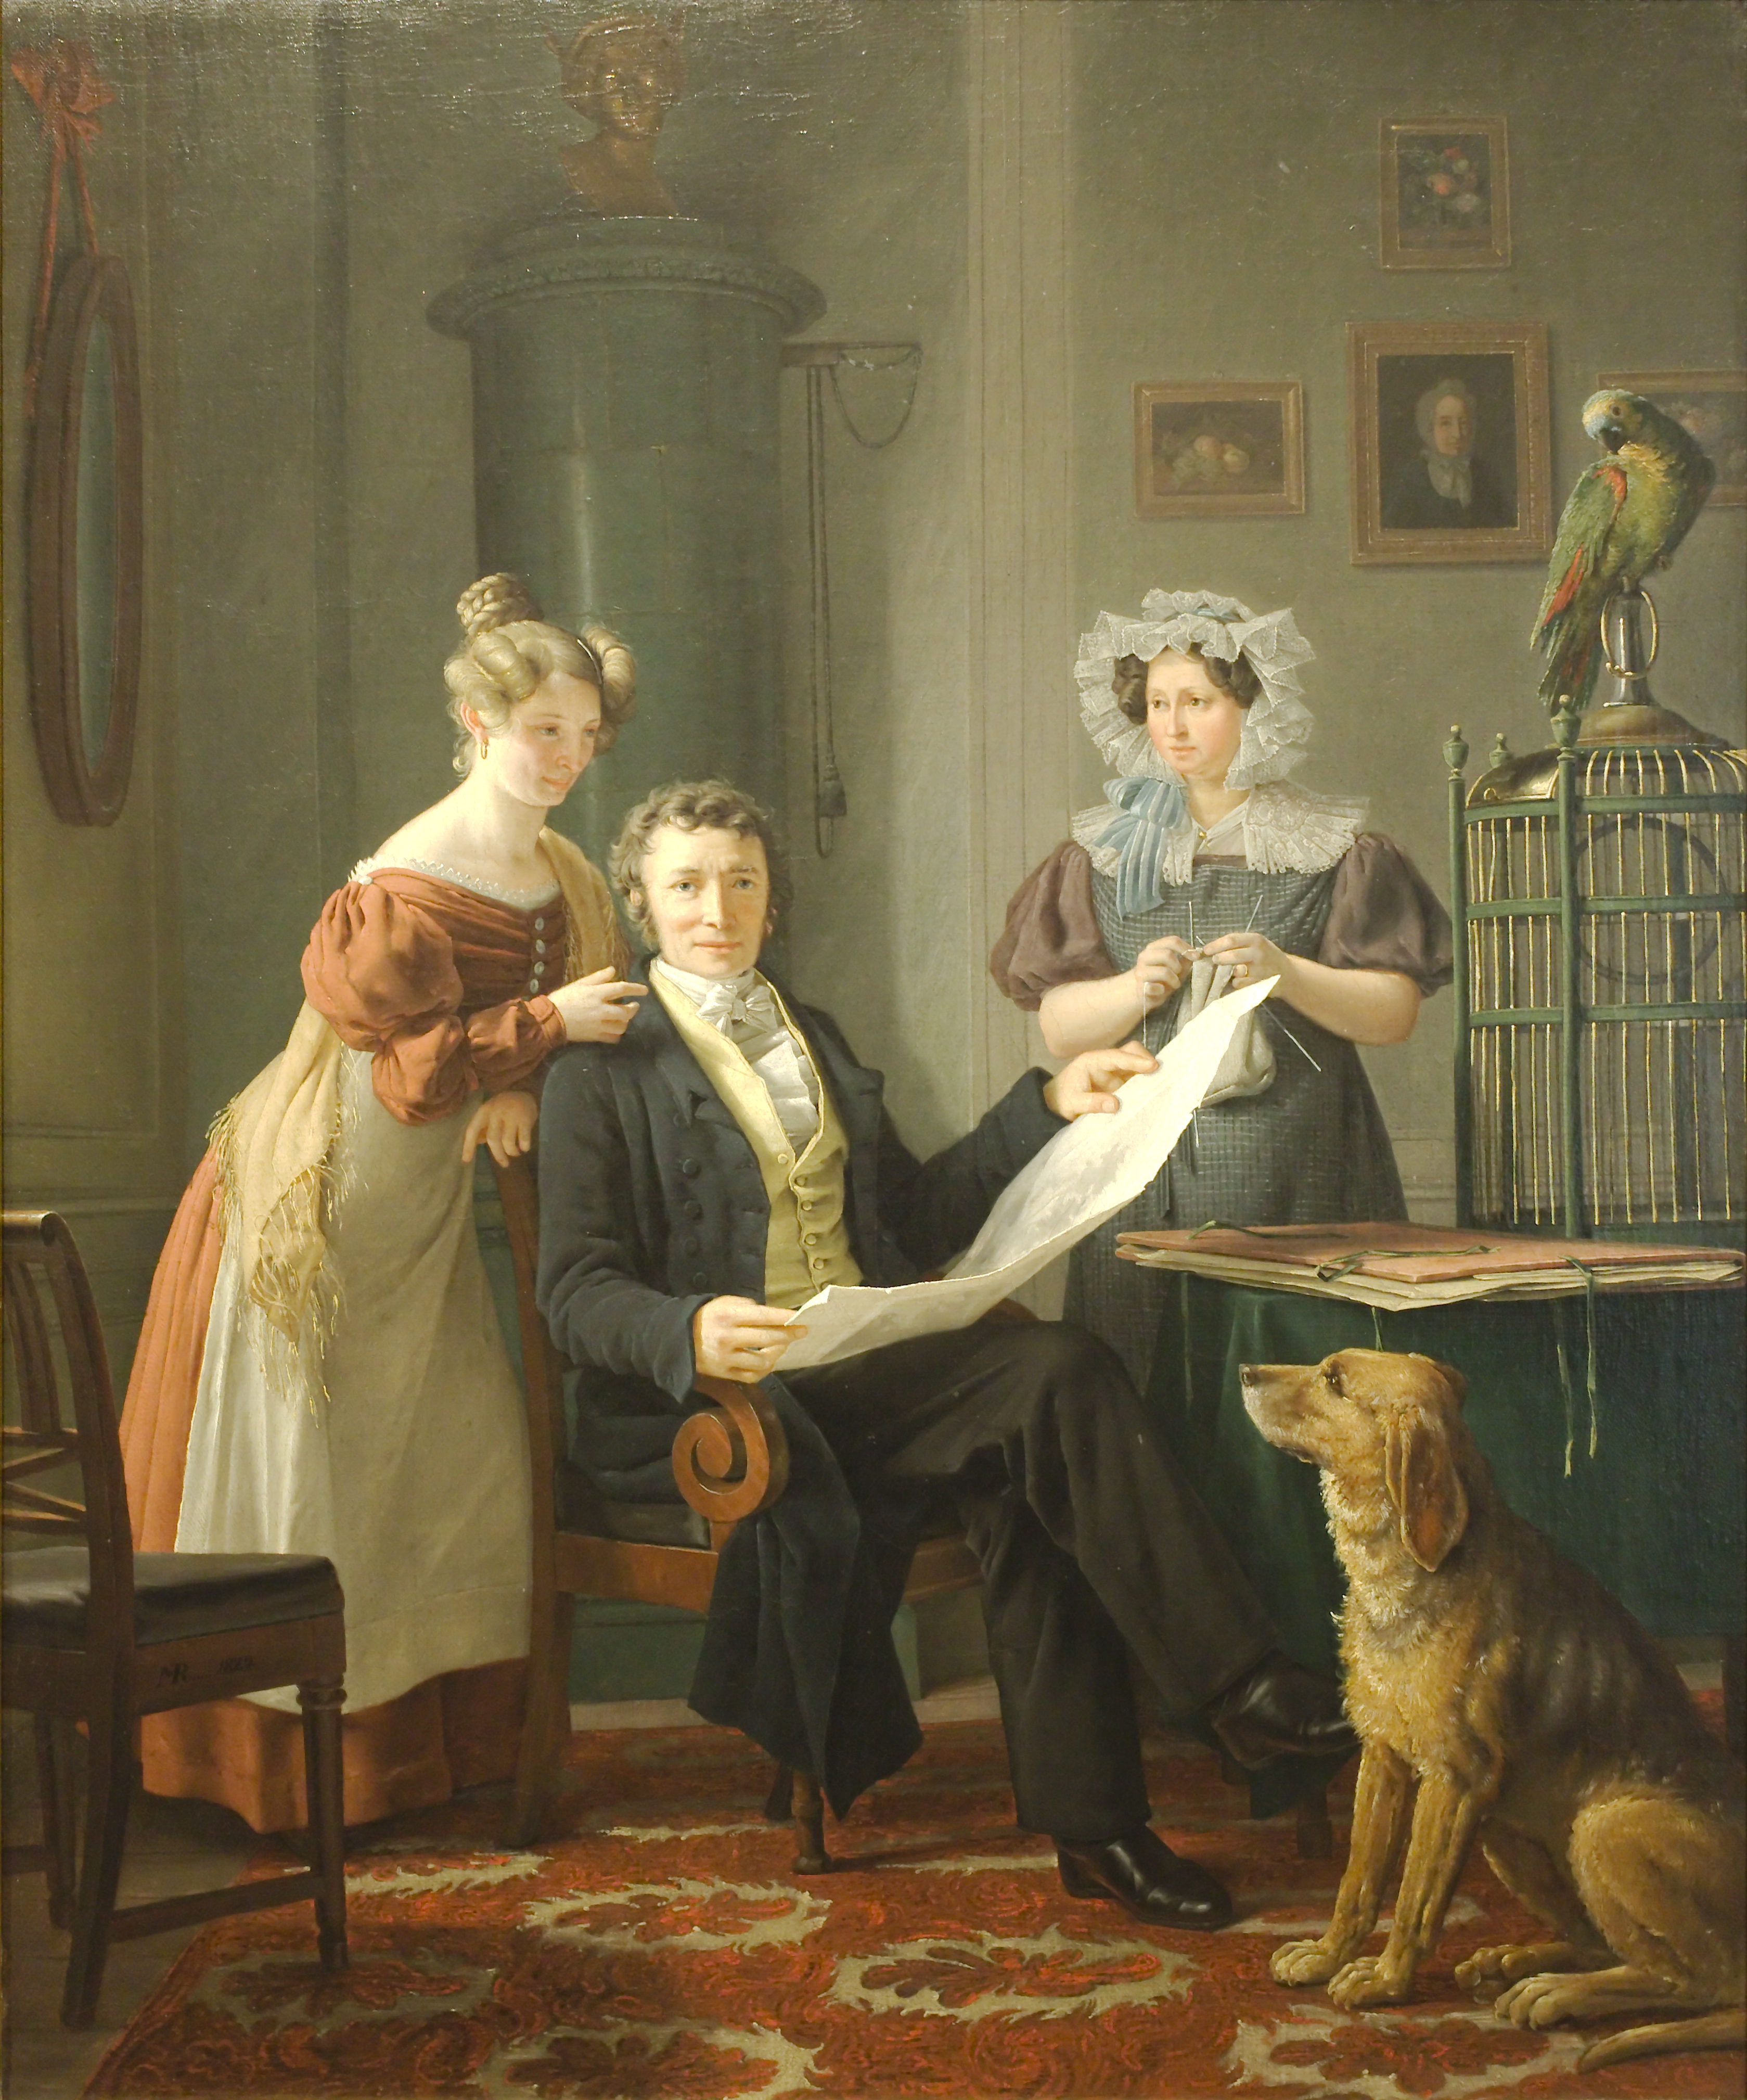 1829 Martinus Rorbye - The Surgeon with Wife and Daughter